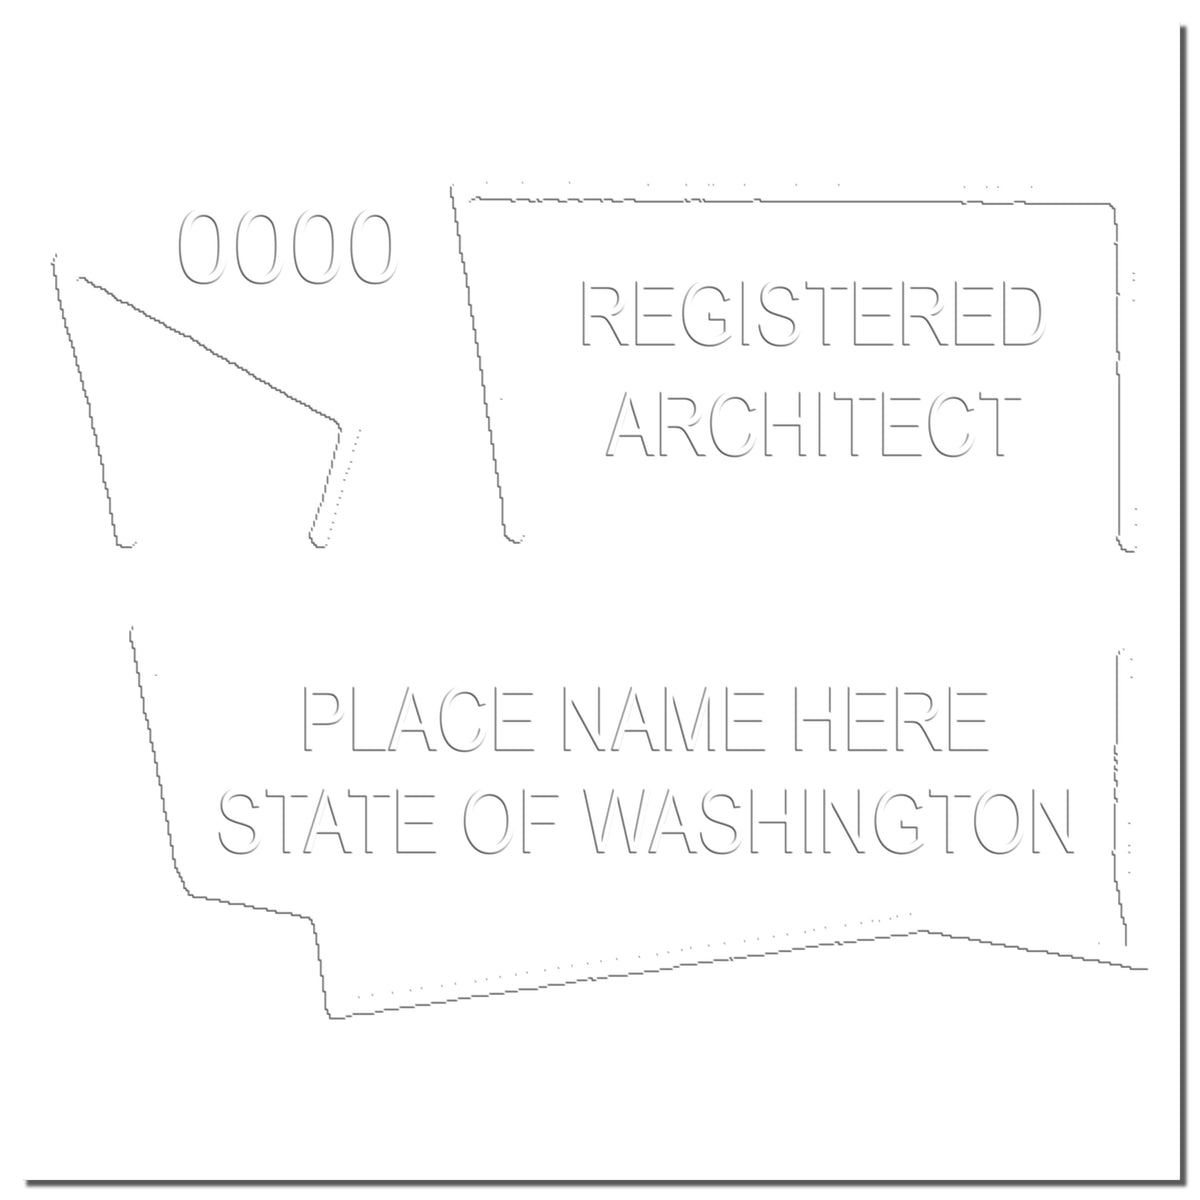 This paper is stamped with a sample imprint of the Gift Washington Architect Seal, signifying its quality and reliability.